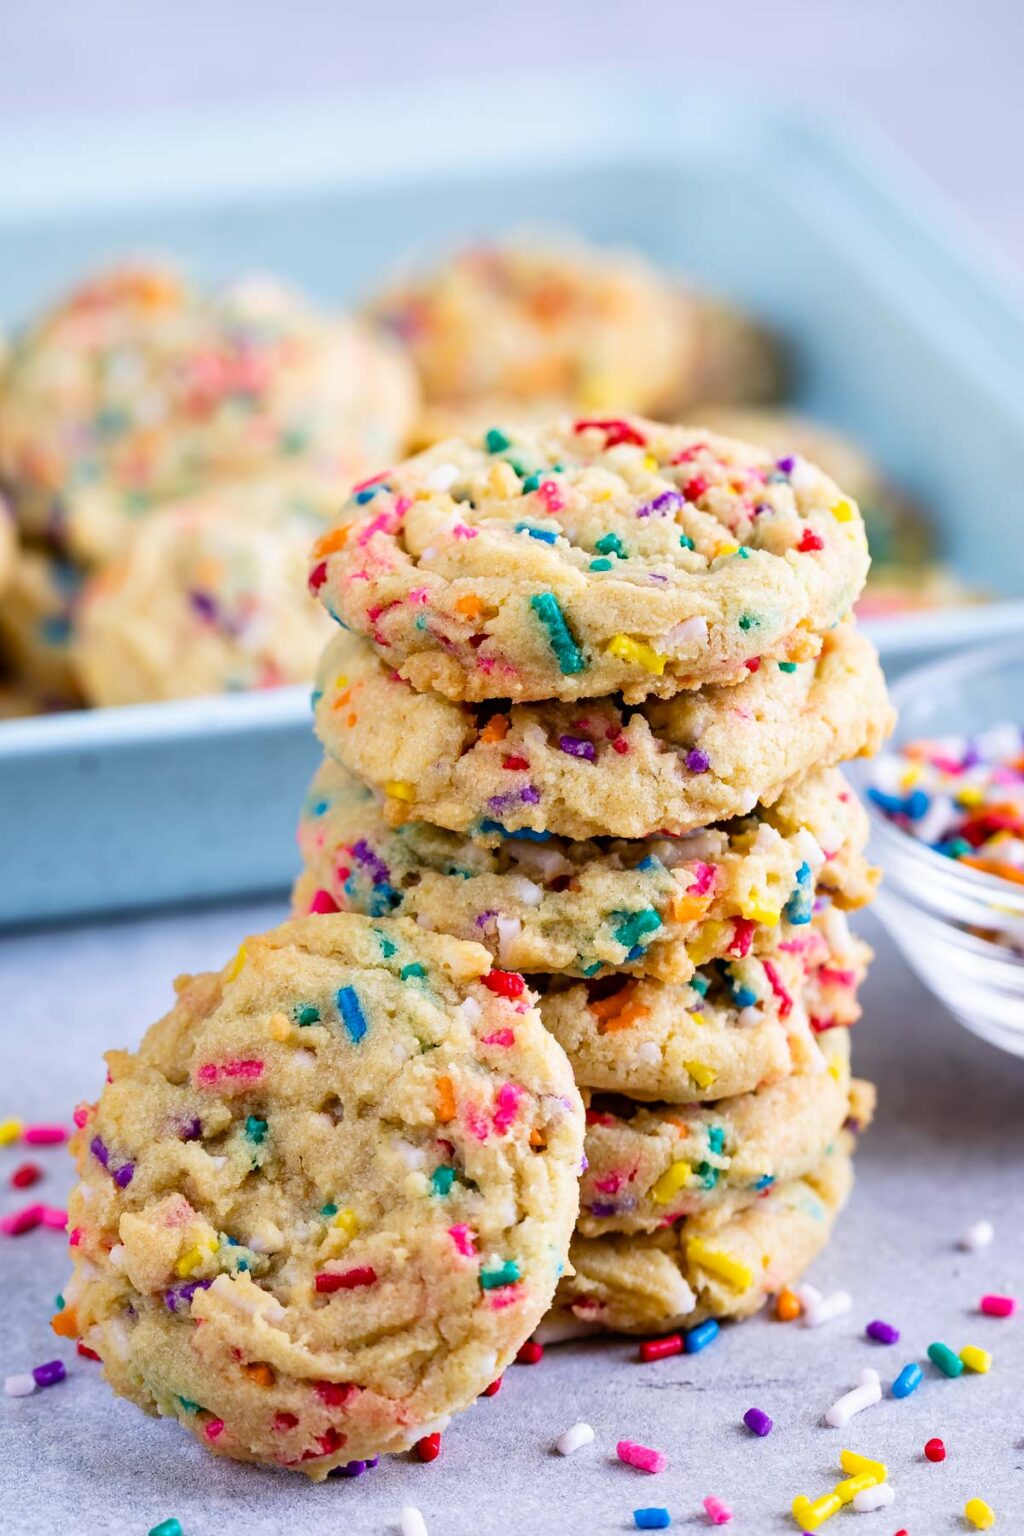 Cake Batter Cookies (Funfetti Cookies) - Crazy for Crust